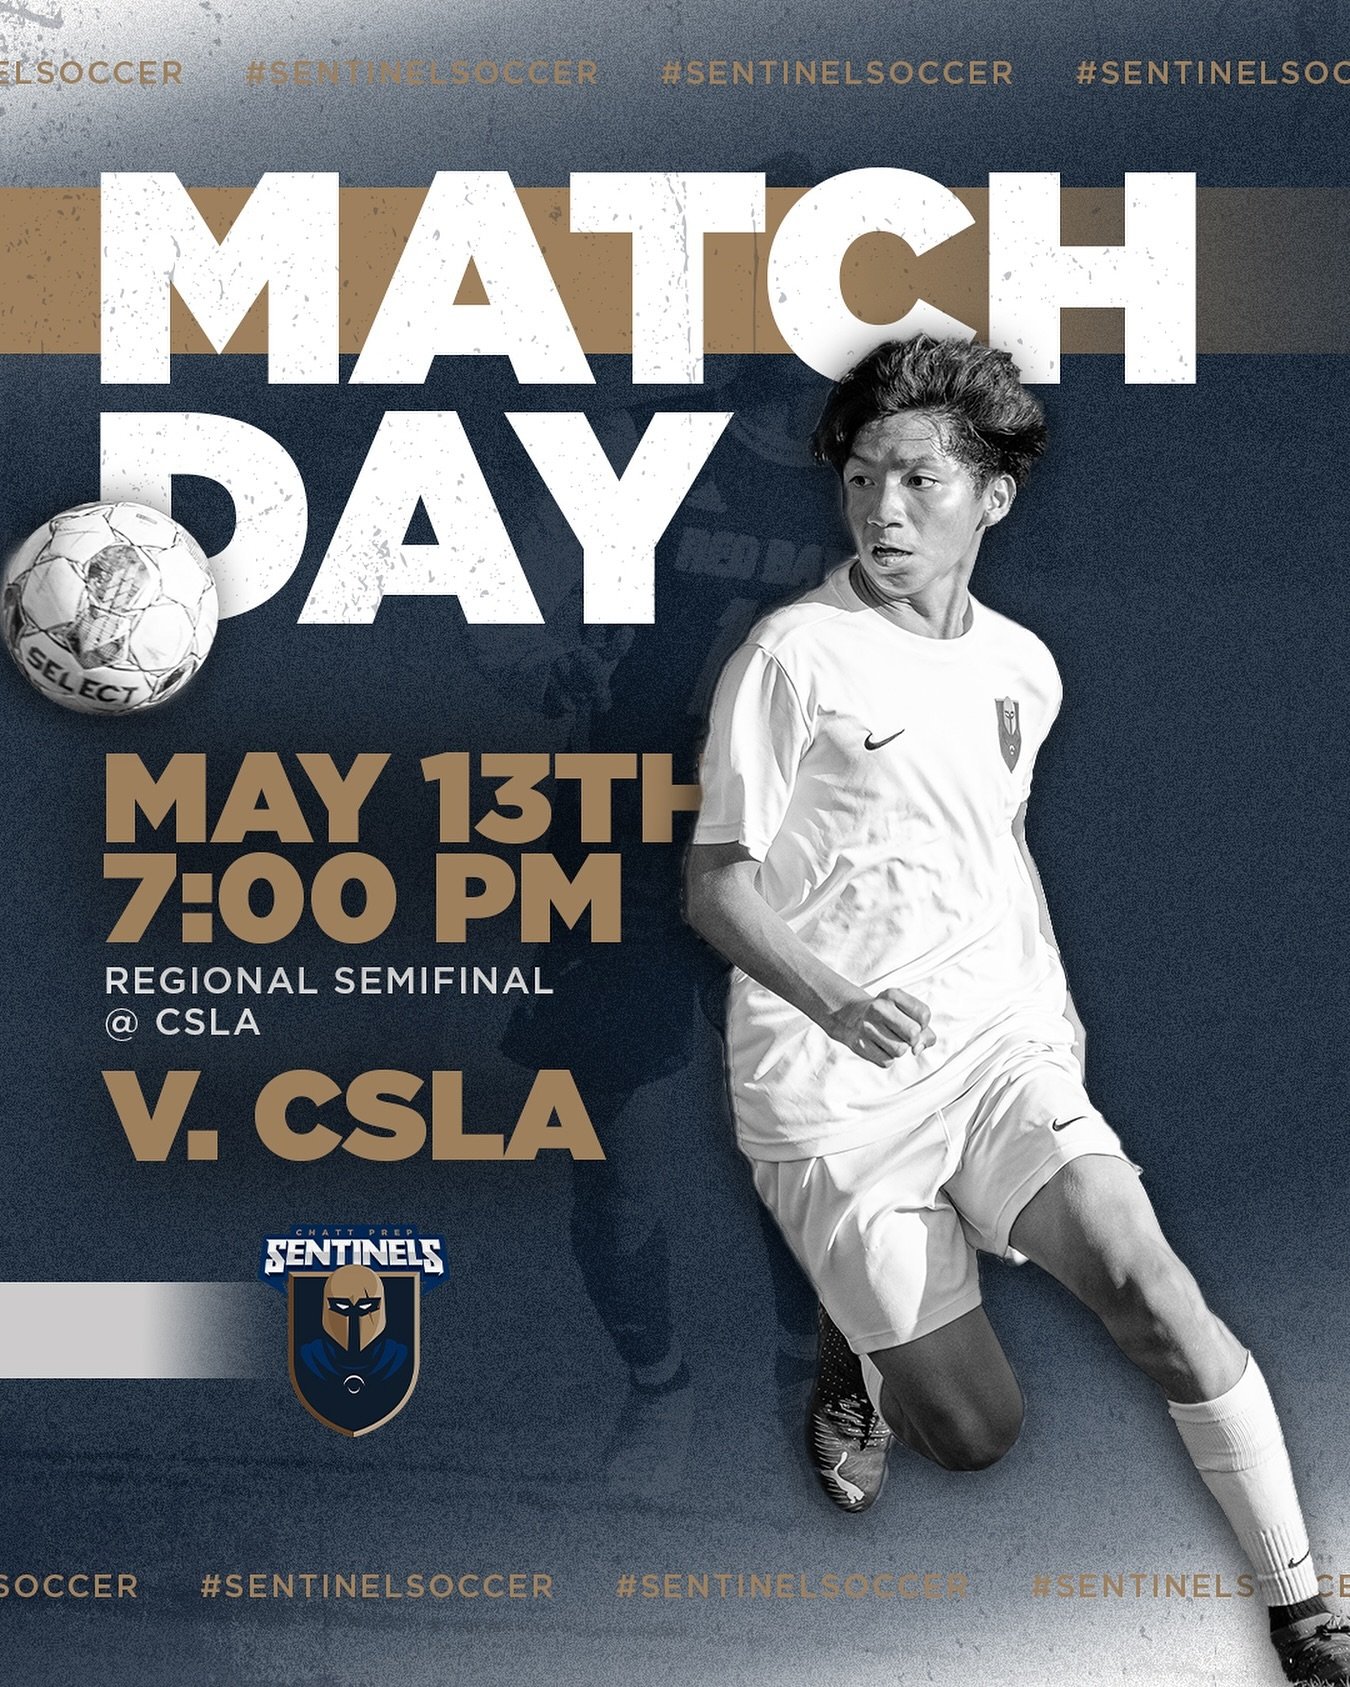 Come out this evening to support our high school soccer program as they match up against CSLA in their regional semifinal game!

Location: CSLA
Date: Monday, May 13th
Time: 7pm